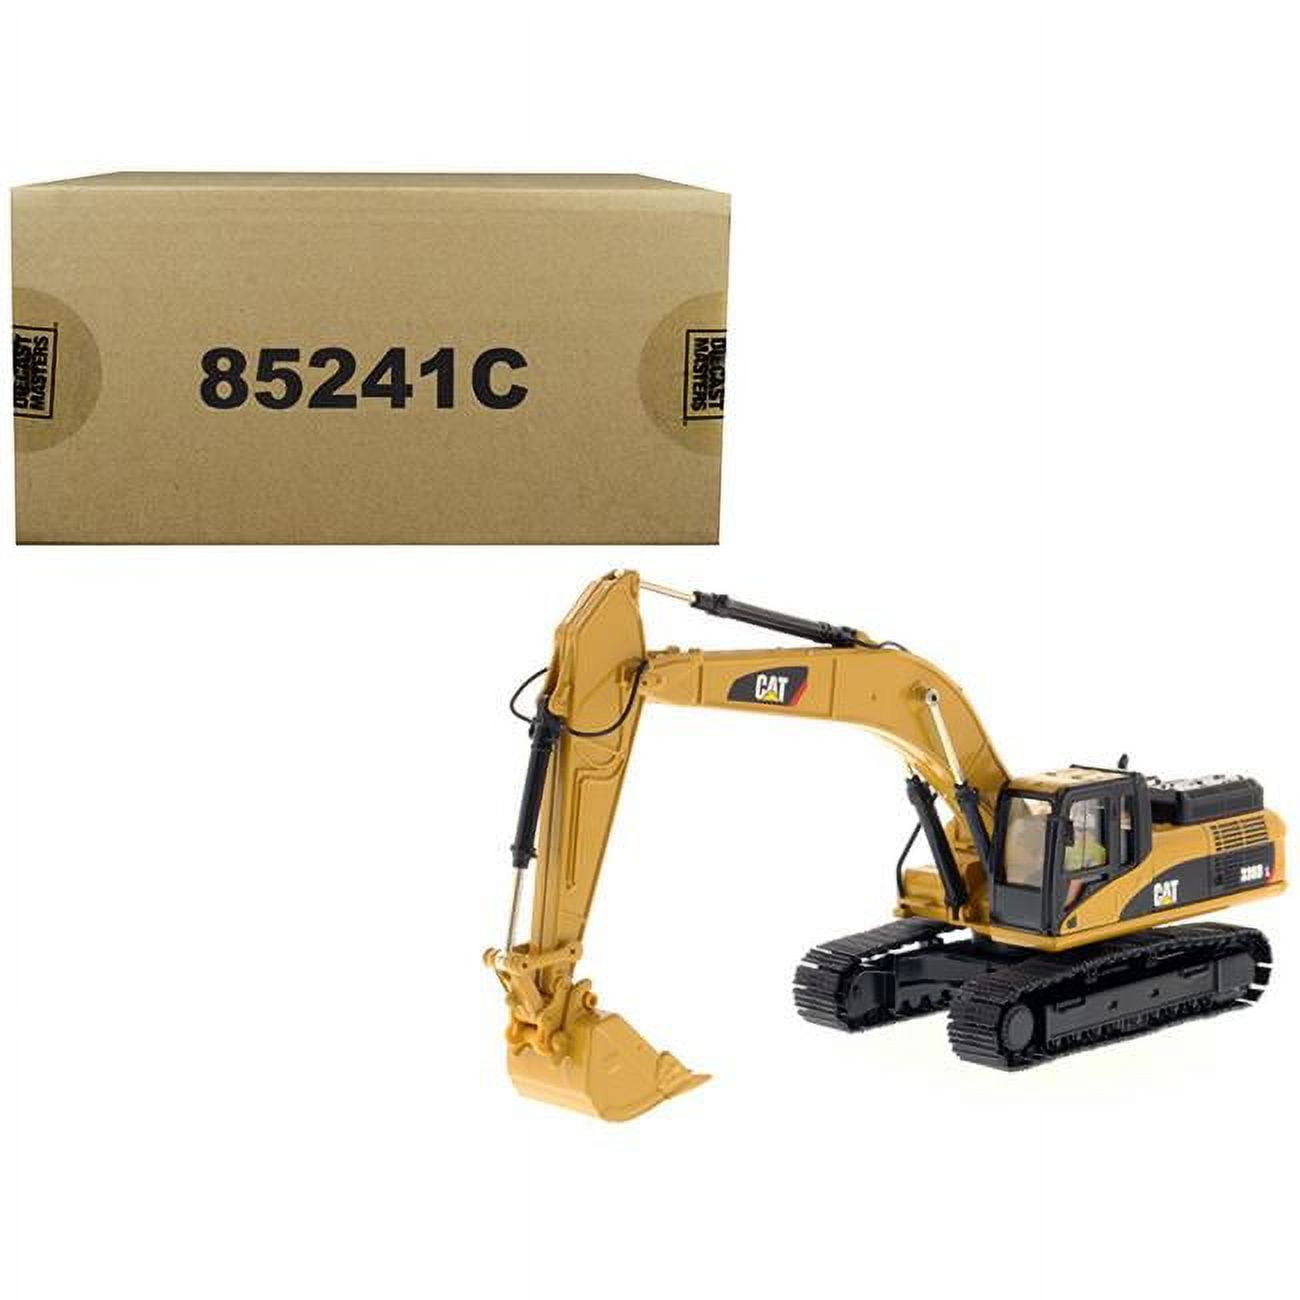 85241c 1 By 50 Scale Diecast Hydraulic Excavator For Cat Caterpillar 336d L Model